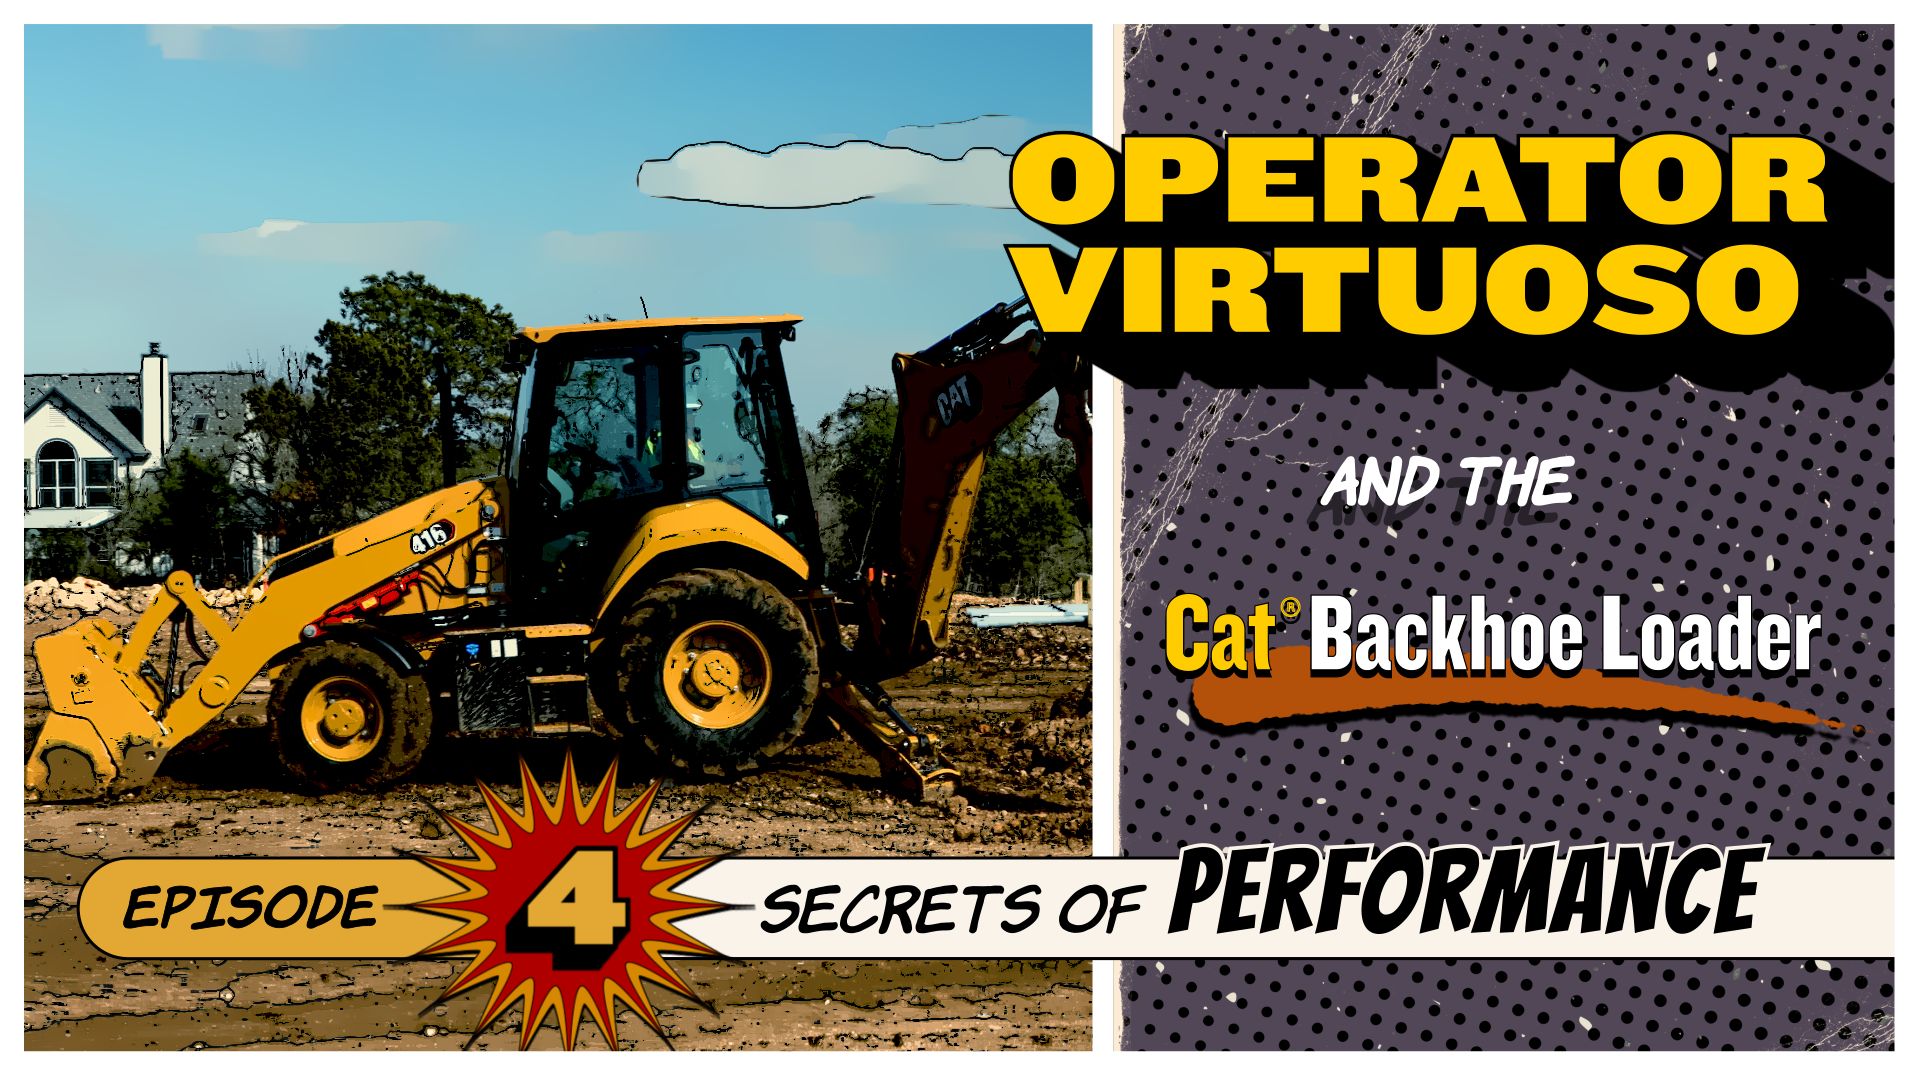 Watch this video episode and see how Operator Virtuoso and the Cat® backhoe loader put powerful performance on full display.